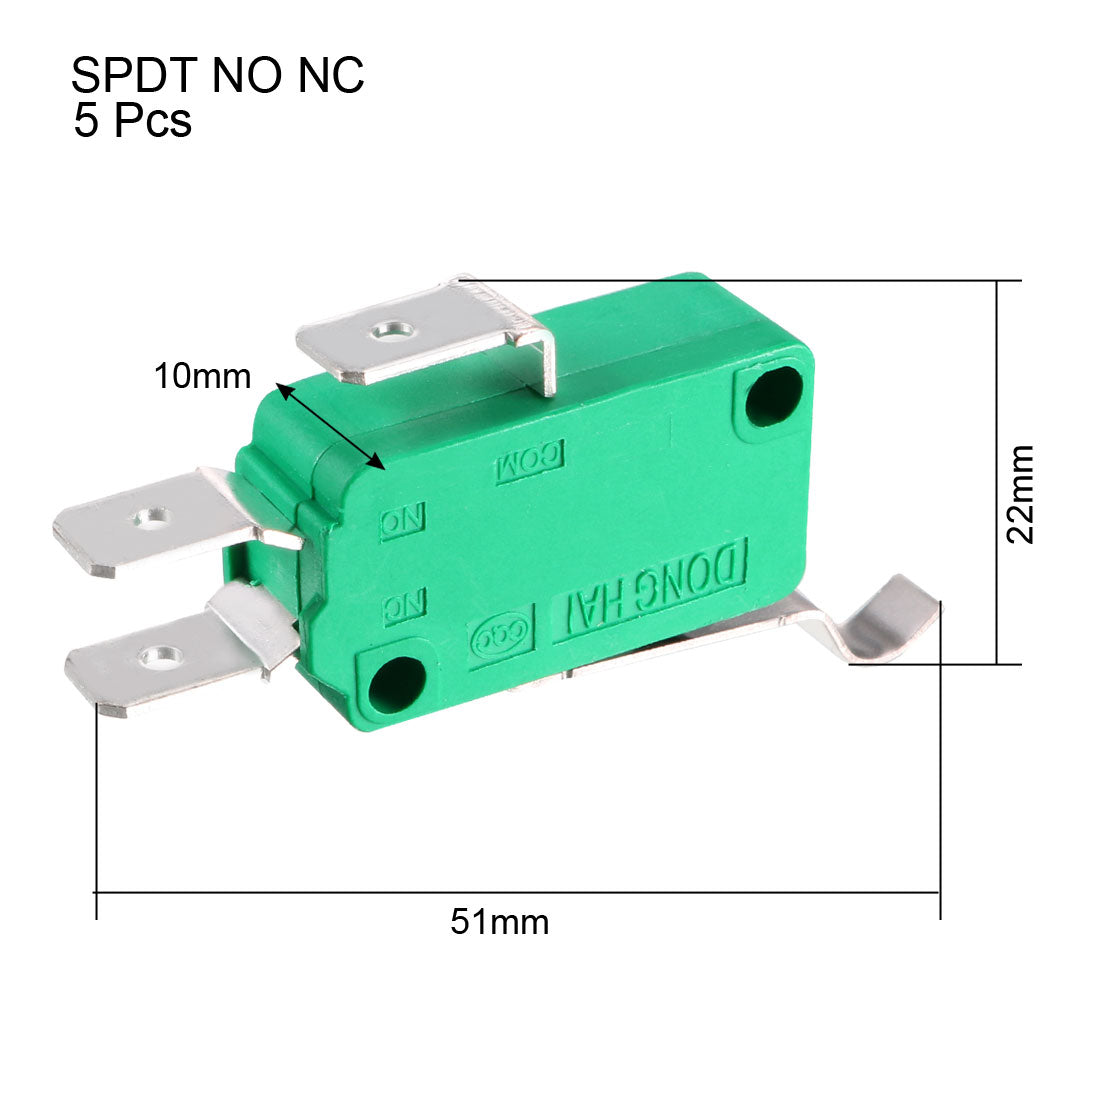 uxcell Uxcell 5PCS KW3-OZ-4 16A 125/250VAC Simulated R Lever Type SPDT NO NC Micro Limit Switches